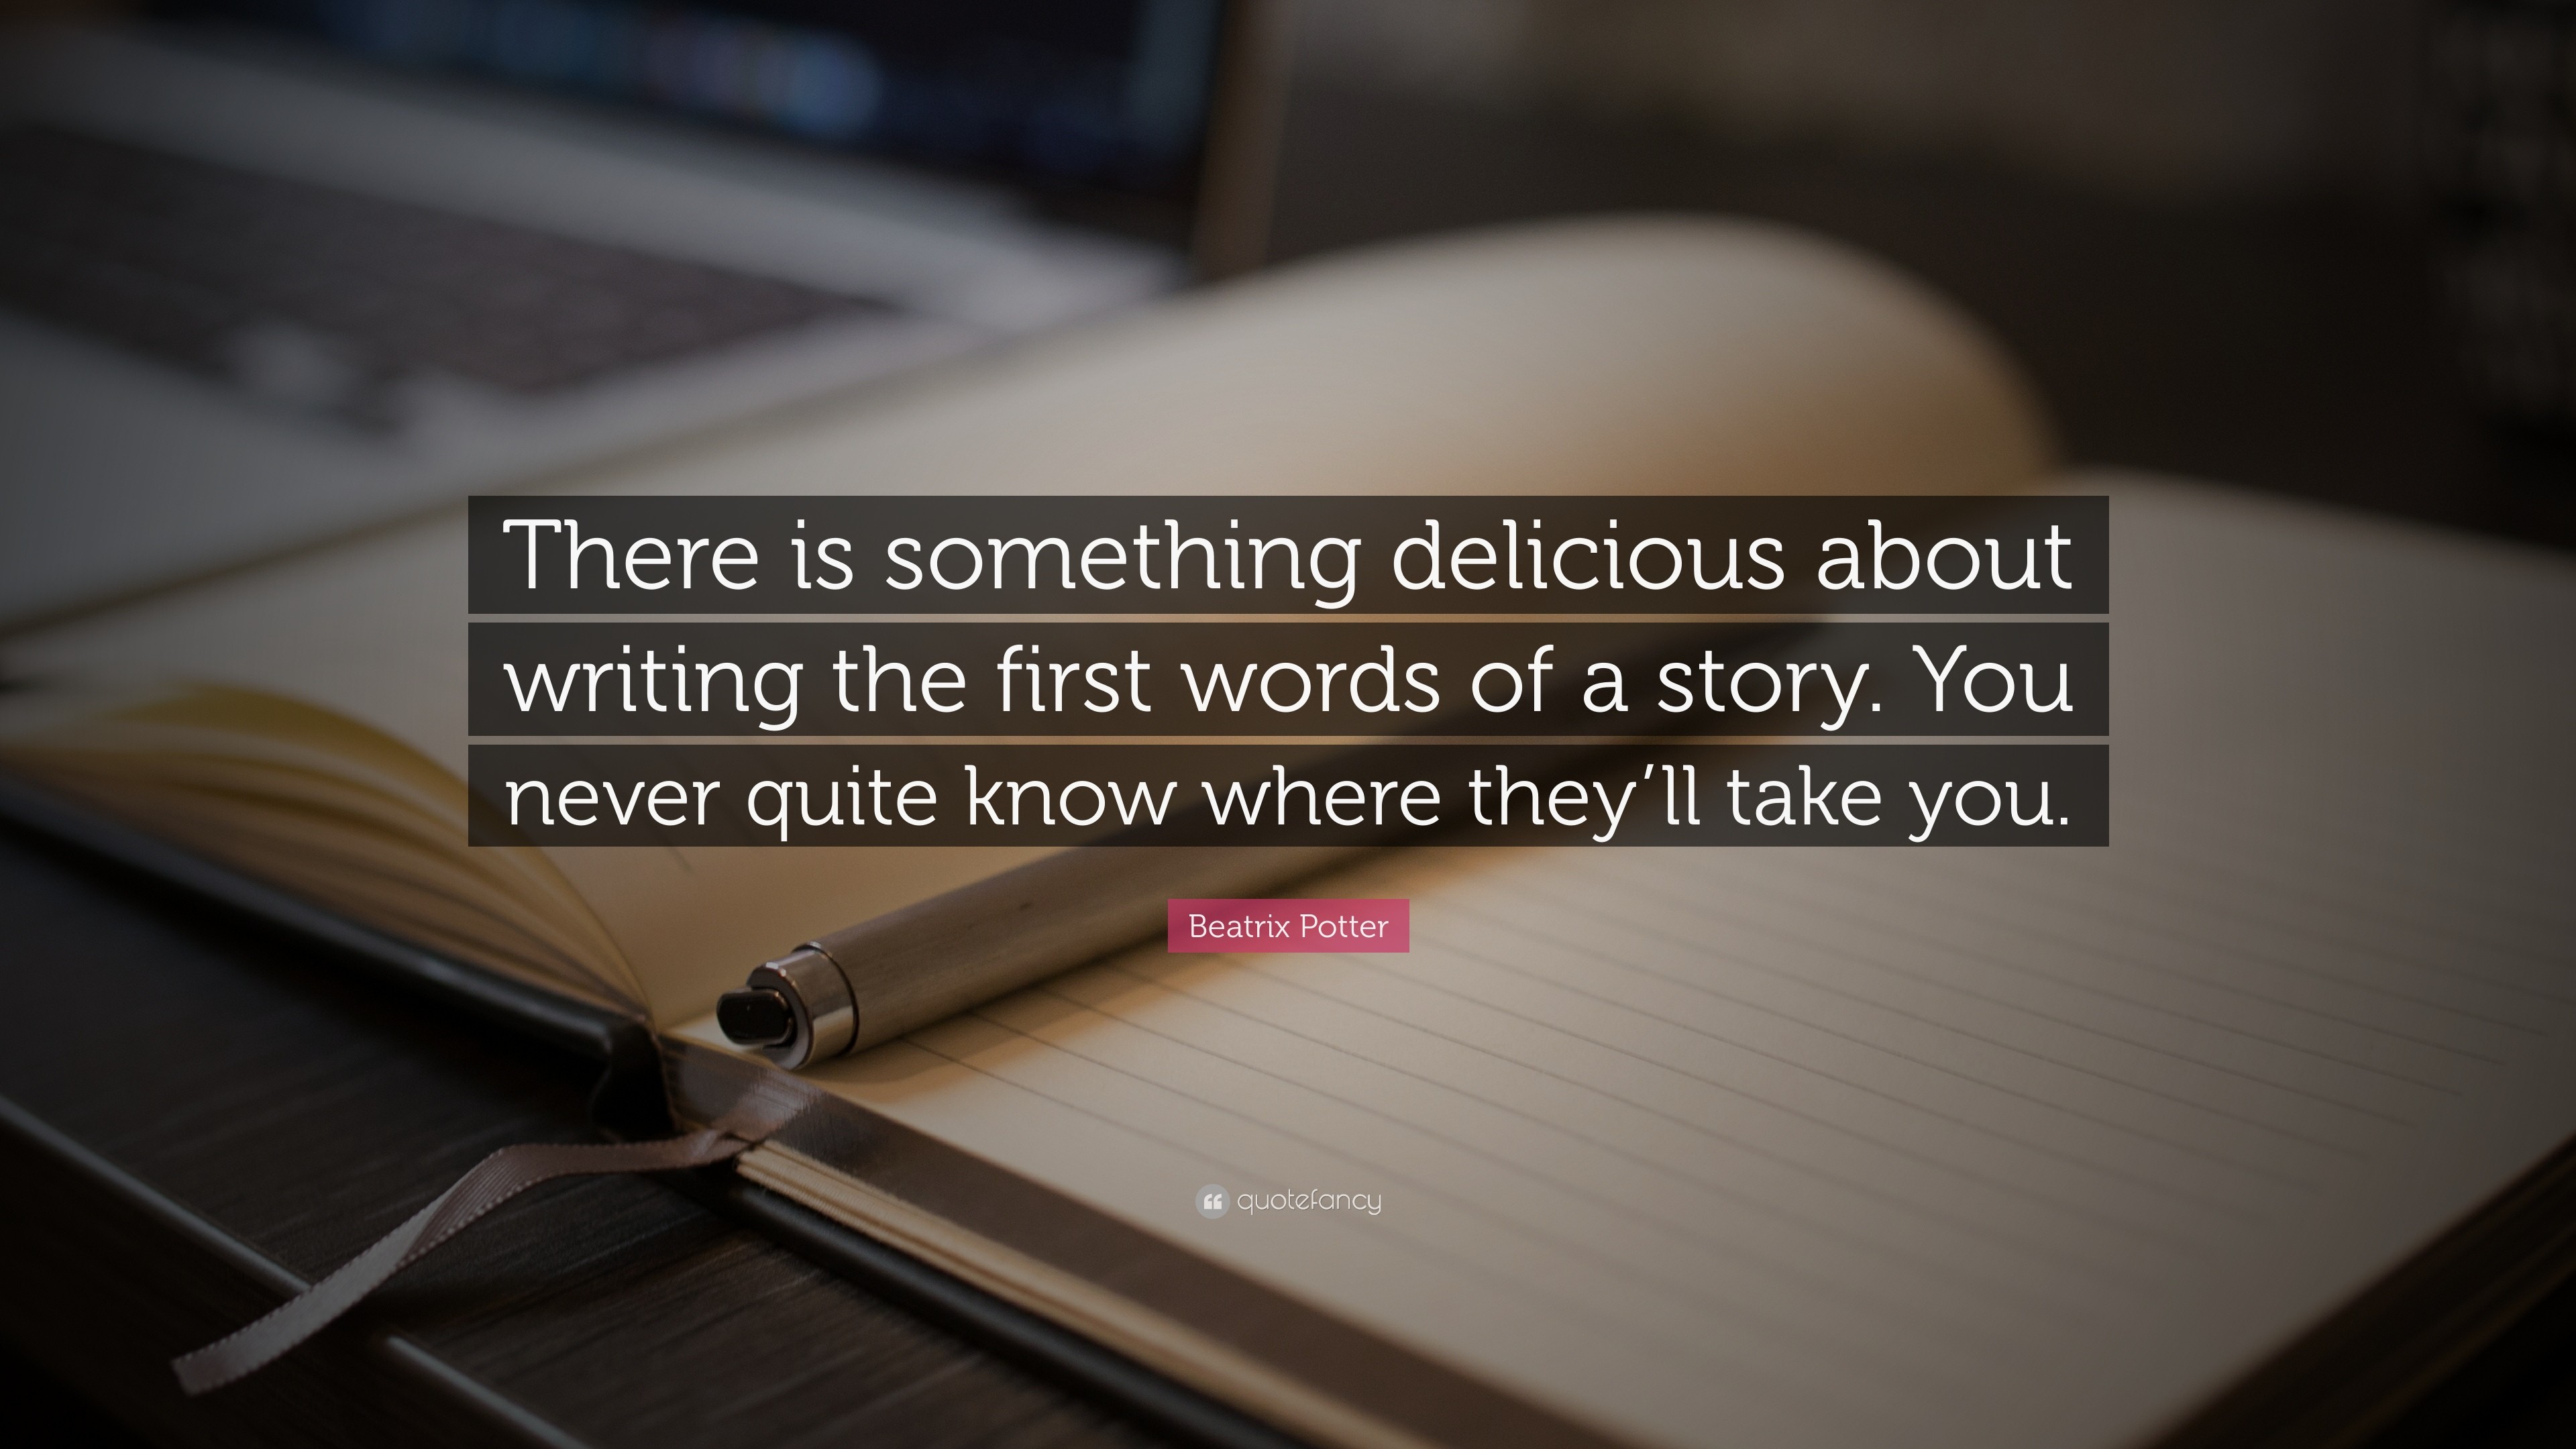 3840x2160 Quotes About Writing: “There is something delicious about writing the first  words of a